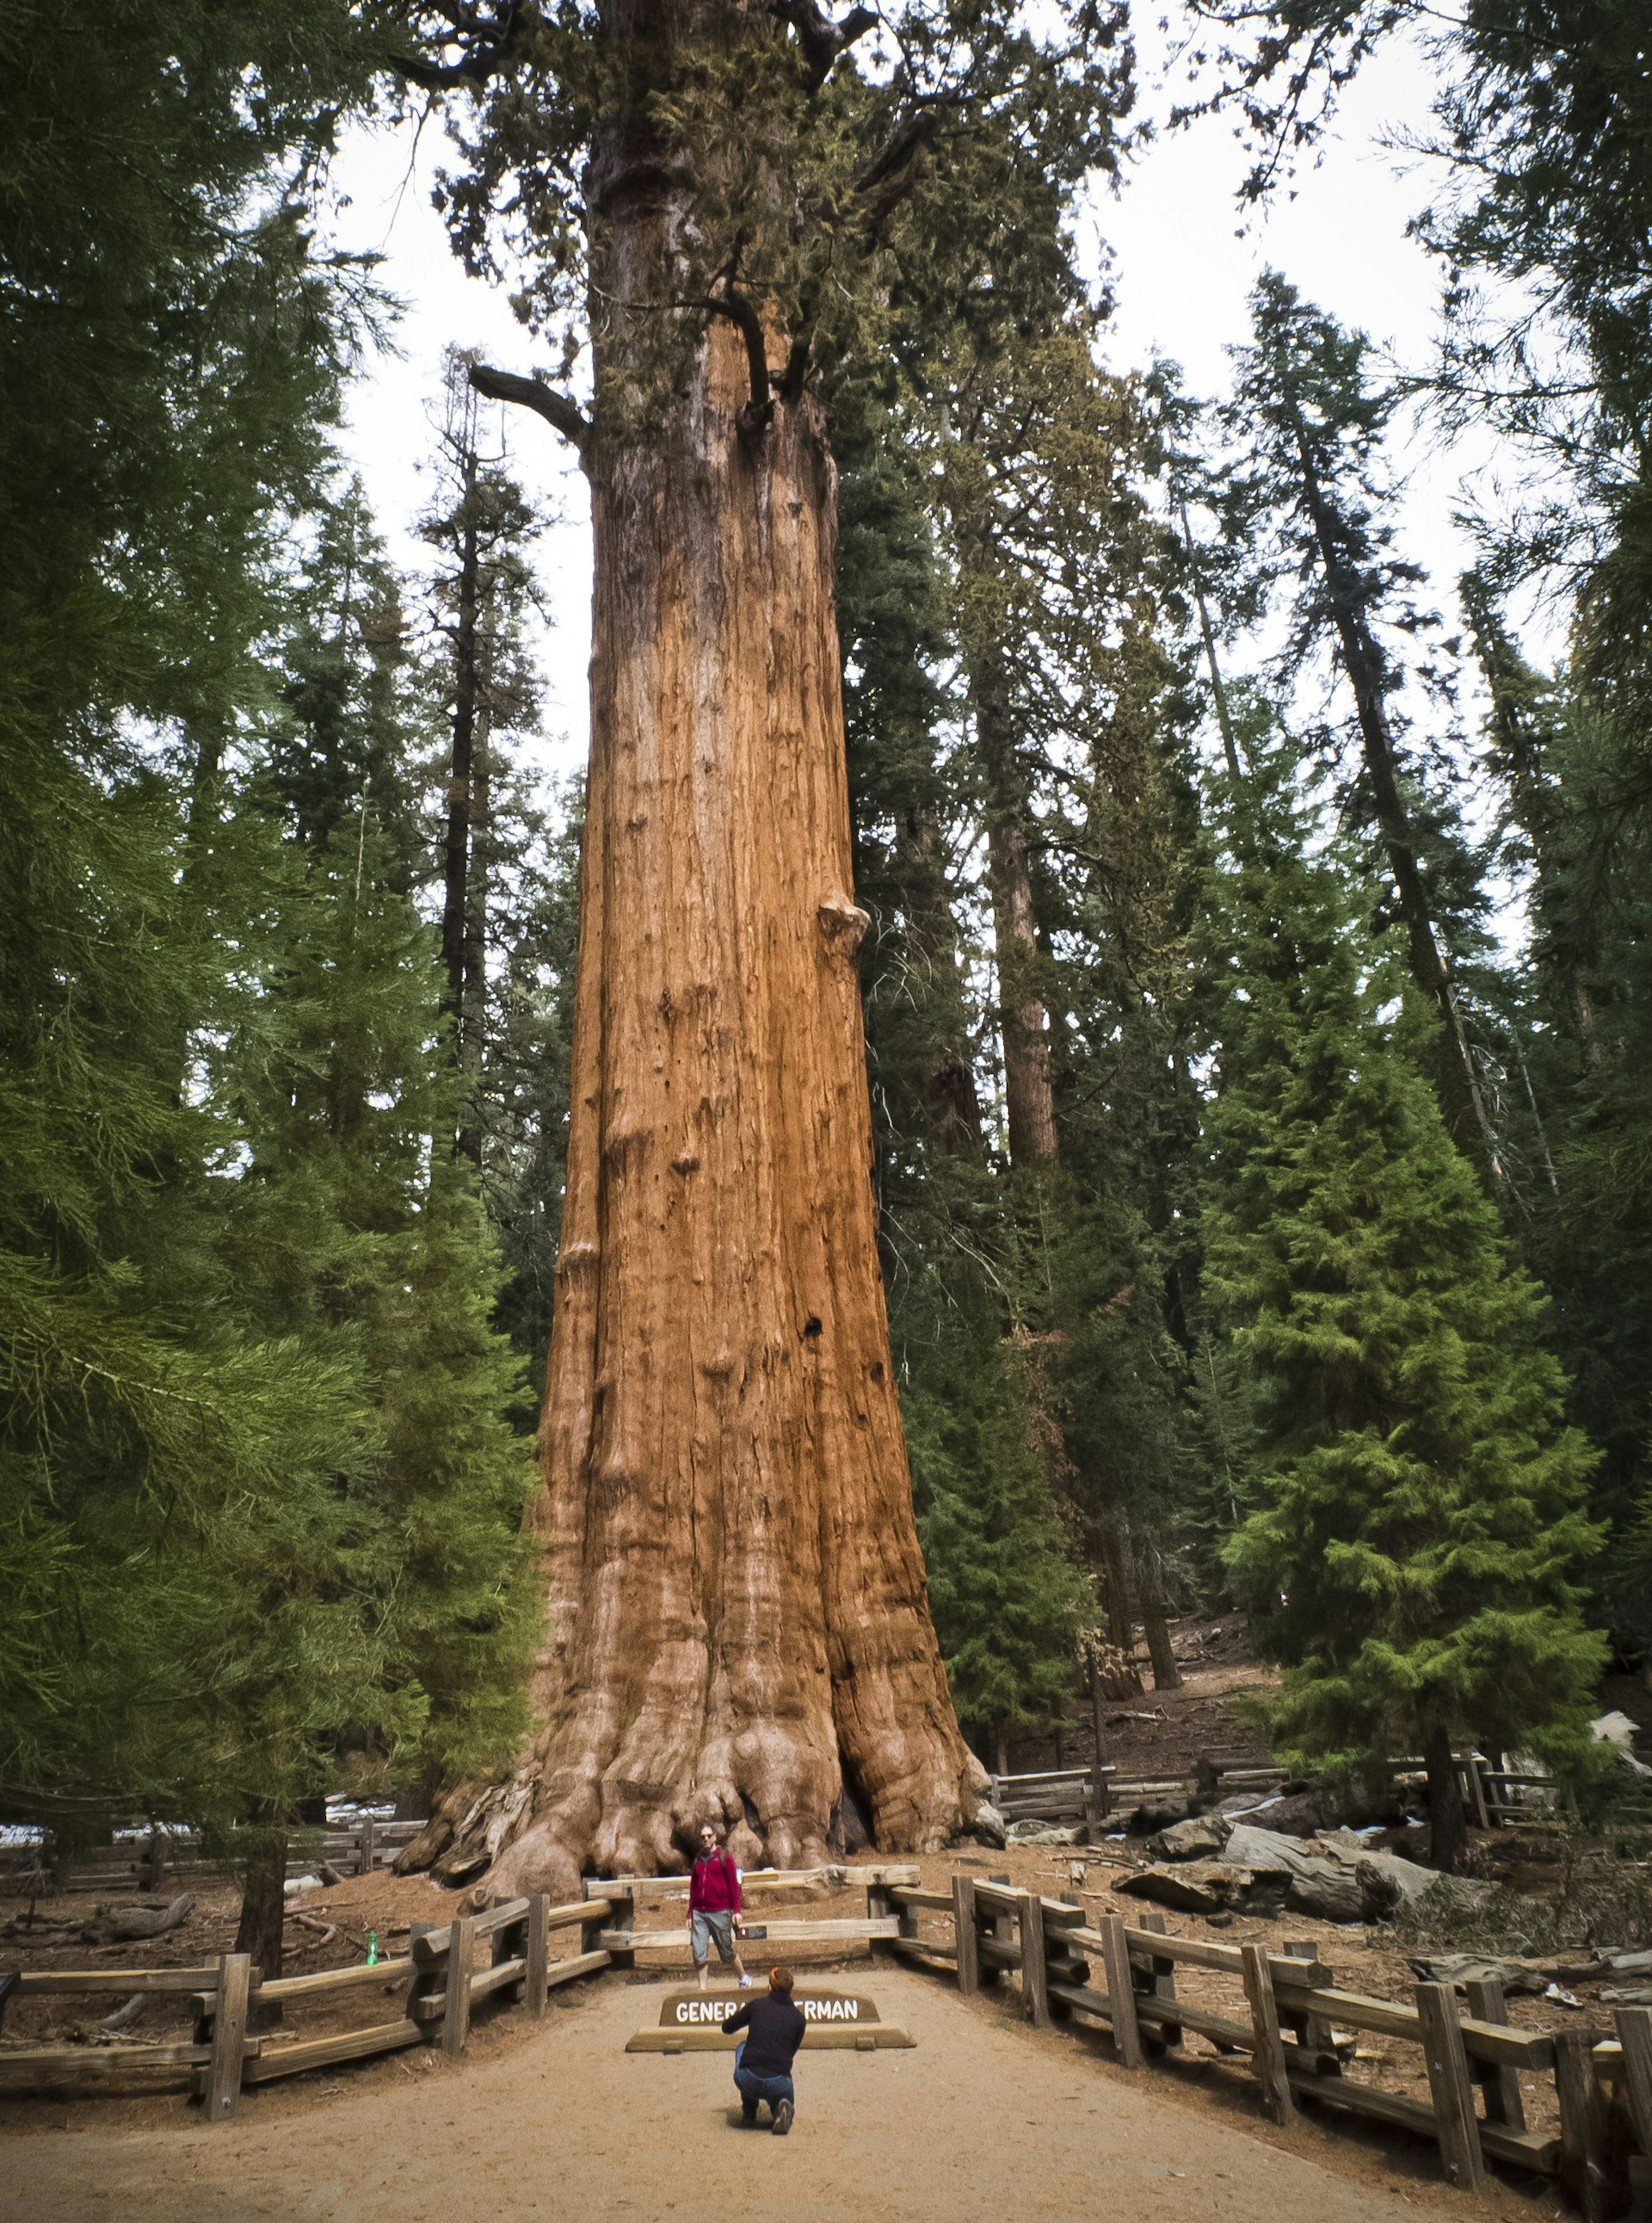 Tourist posing for a photo next to the General Sherman Giant Sequoia